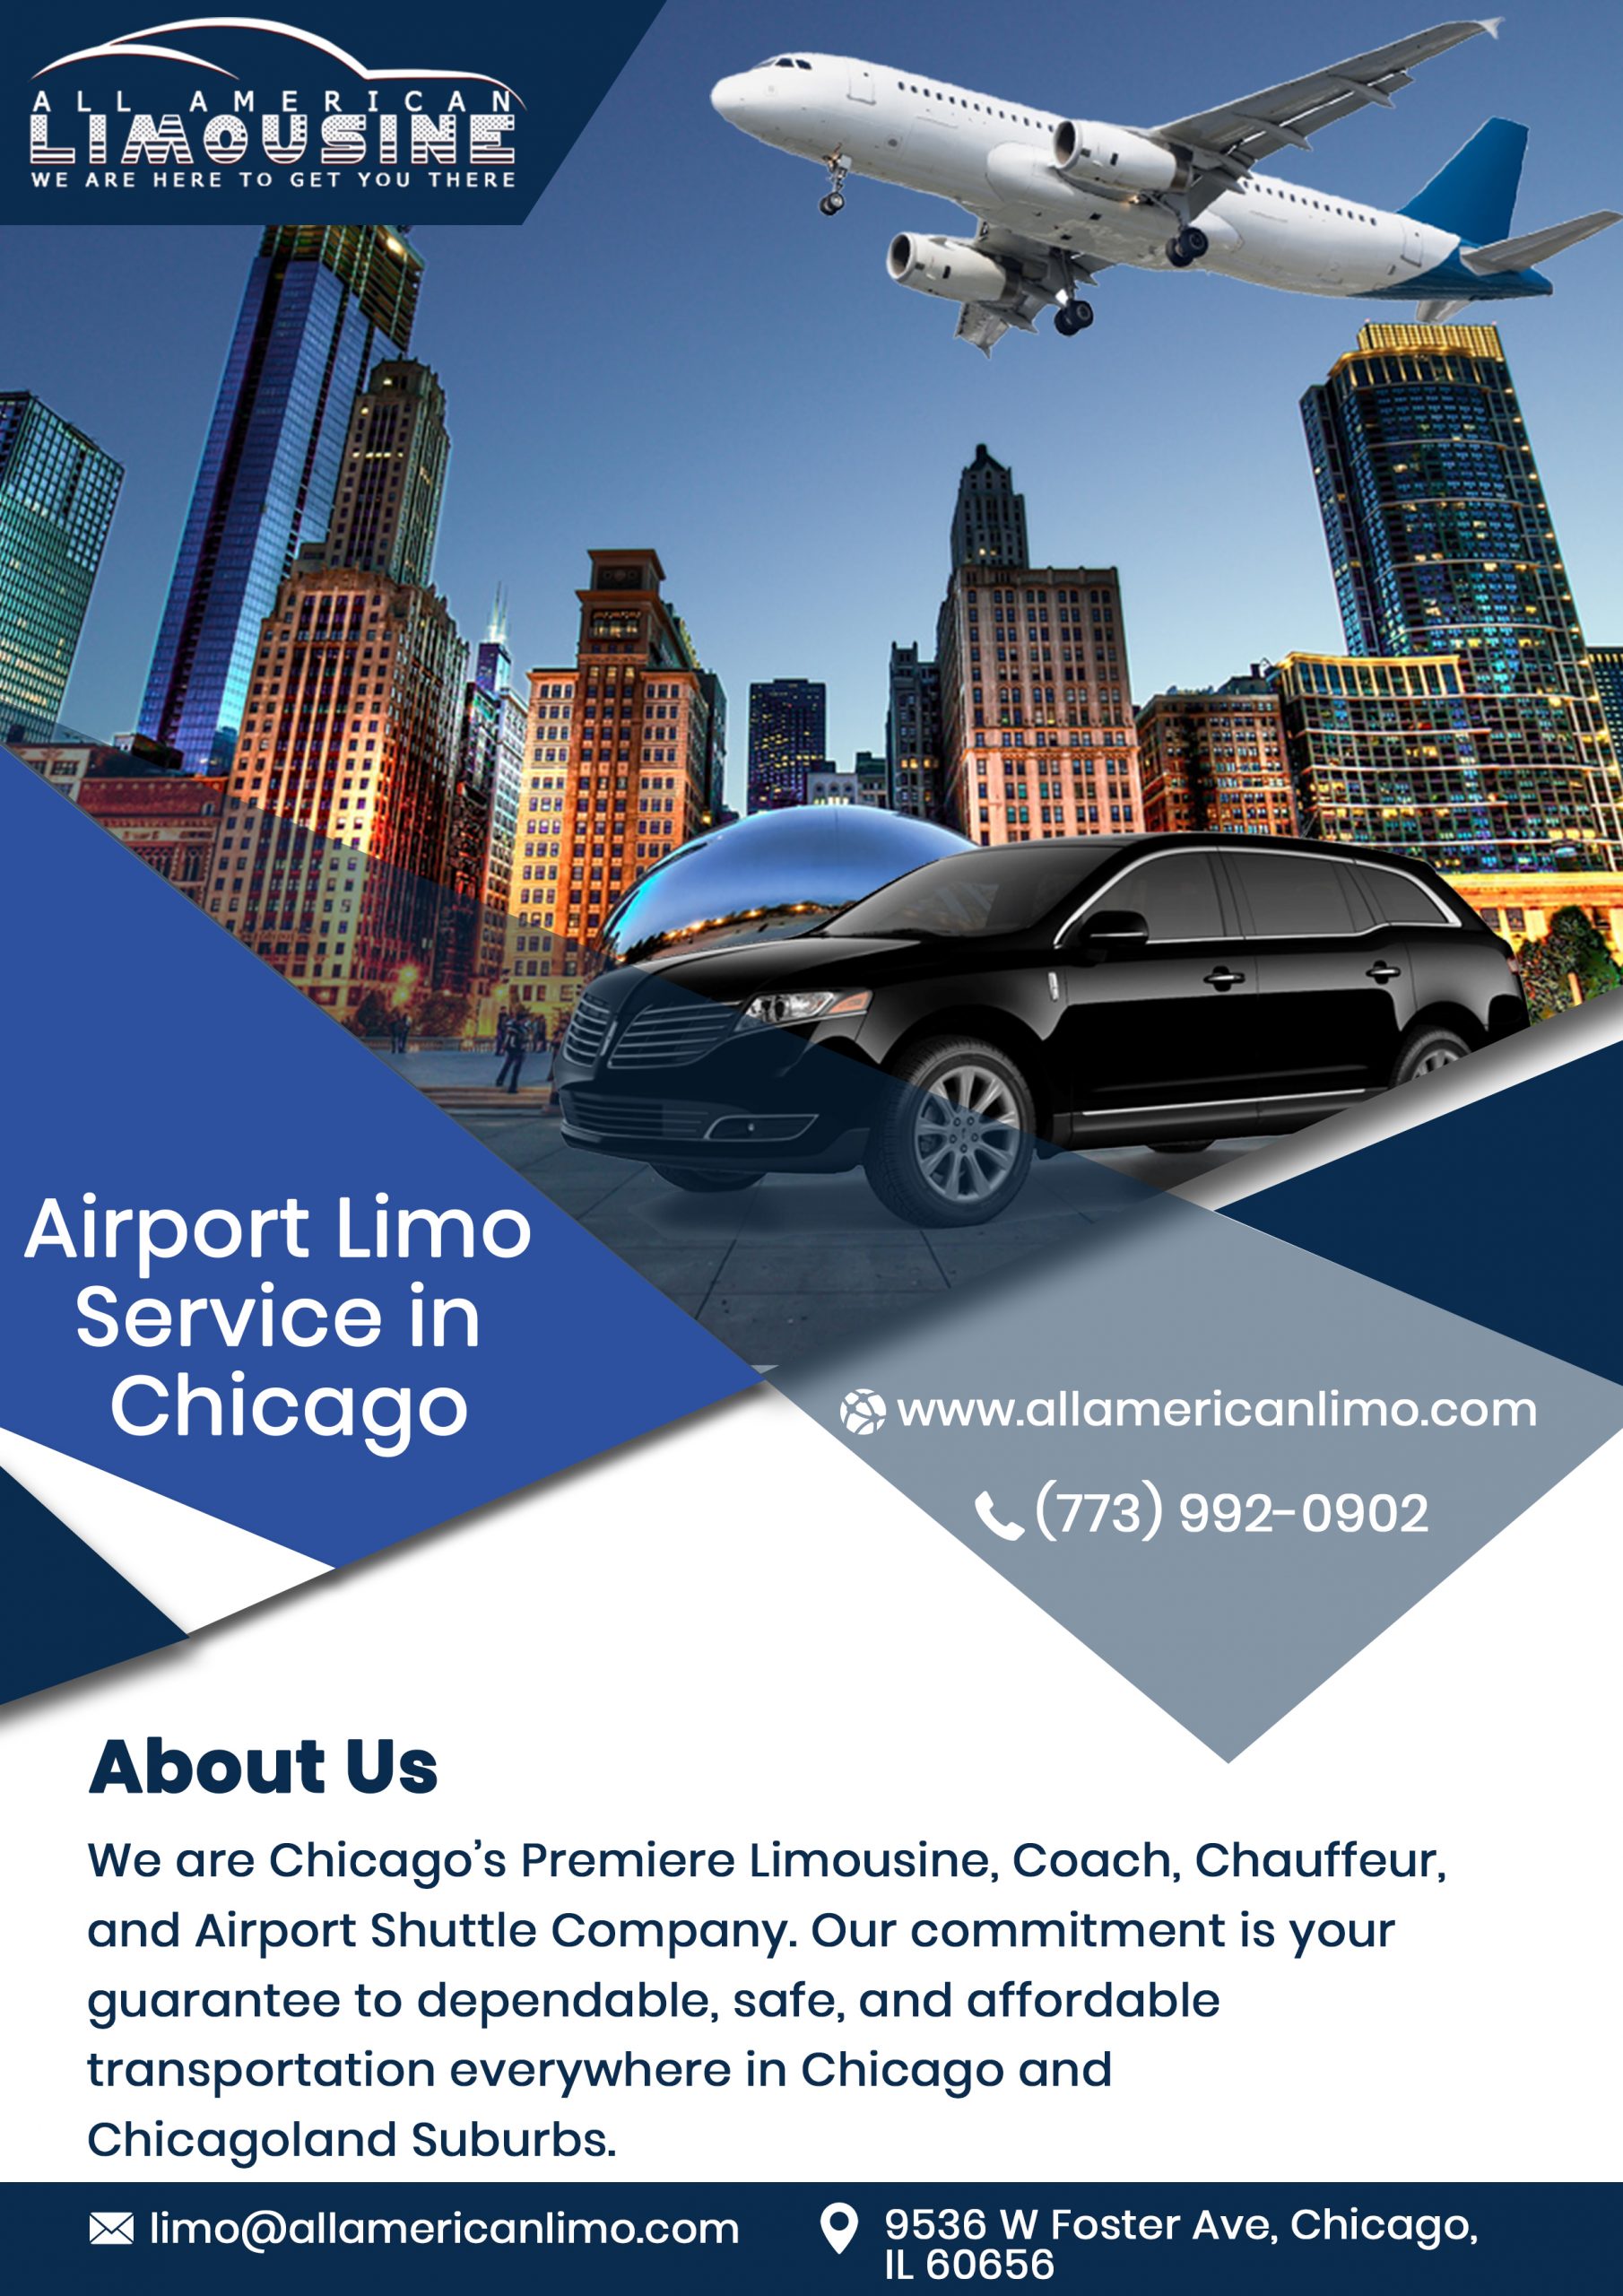 Chicago Car Service Near Me 60624, Party Bus 60624, Mercedes Sprinter Limo to 60624, Chicago Limo 60624, Limo Service 60624 to Airport, Hire, Rent, Get, Find, Car Service 60624 to Airport, Transportation Service 60624 to O'Hare, Corporate Travel 60624, Airport Travel 60624